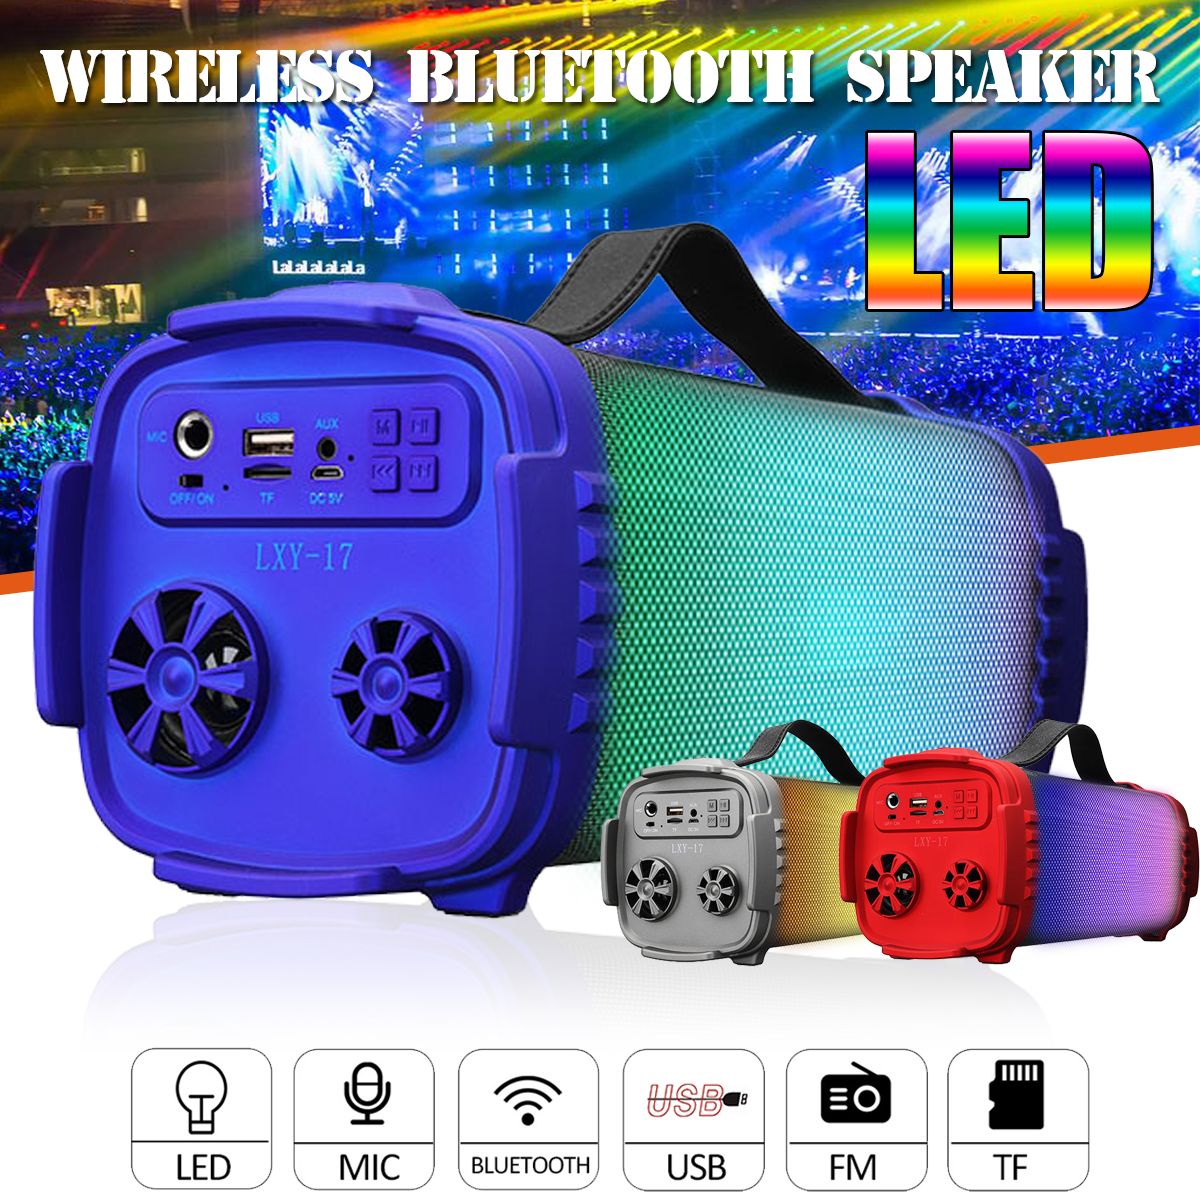 Portable-Wireless-bluetooth-Speaker-Colorful-LED-Light-Outdoor-Stereo-Bass-FM-Radio-TF-Card-Speaker-1388743